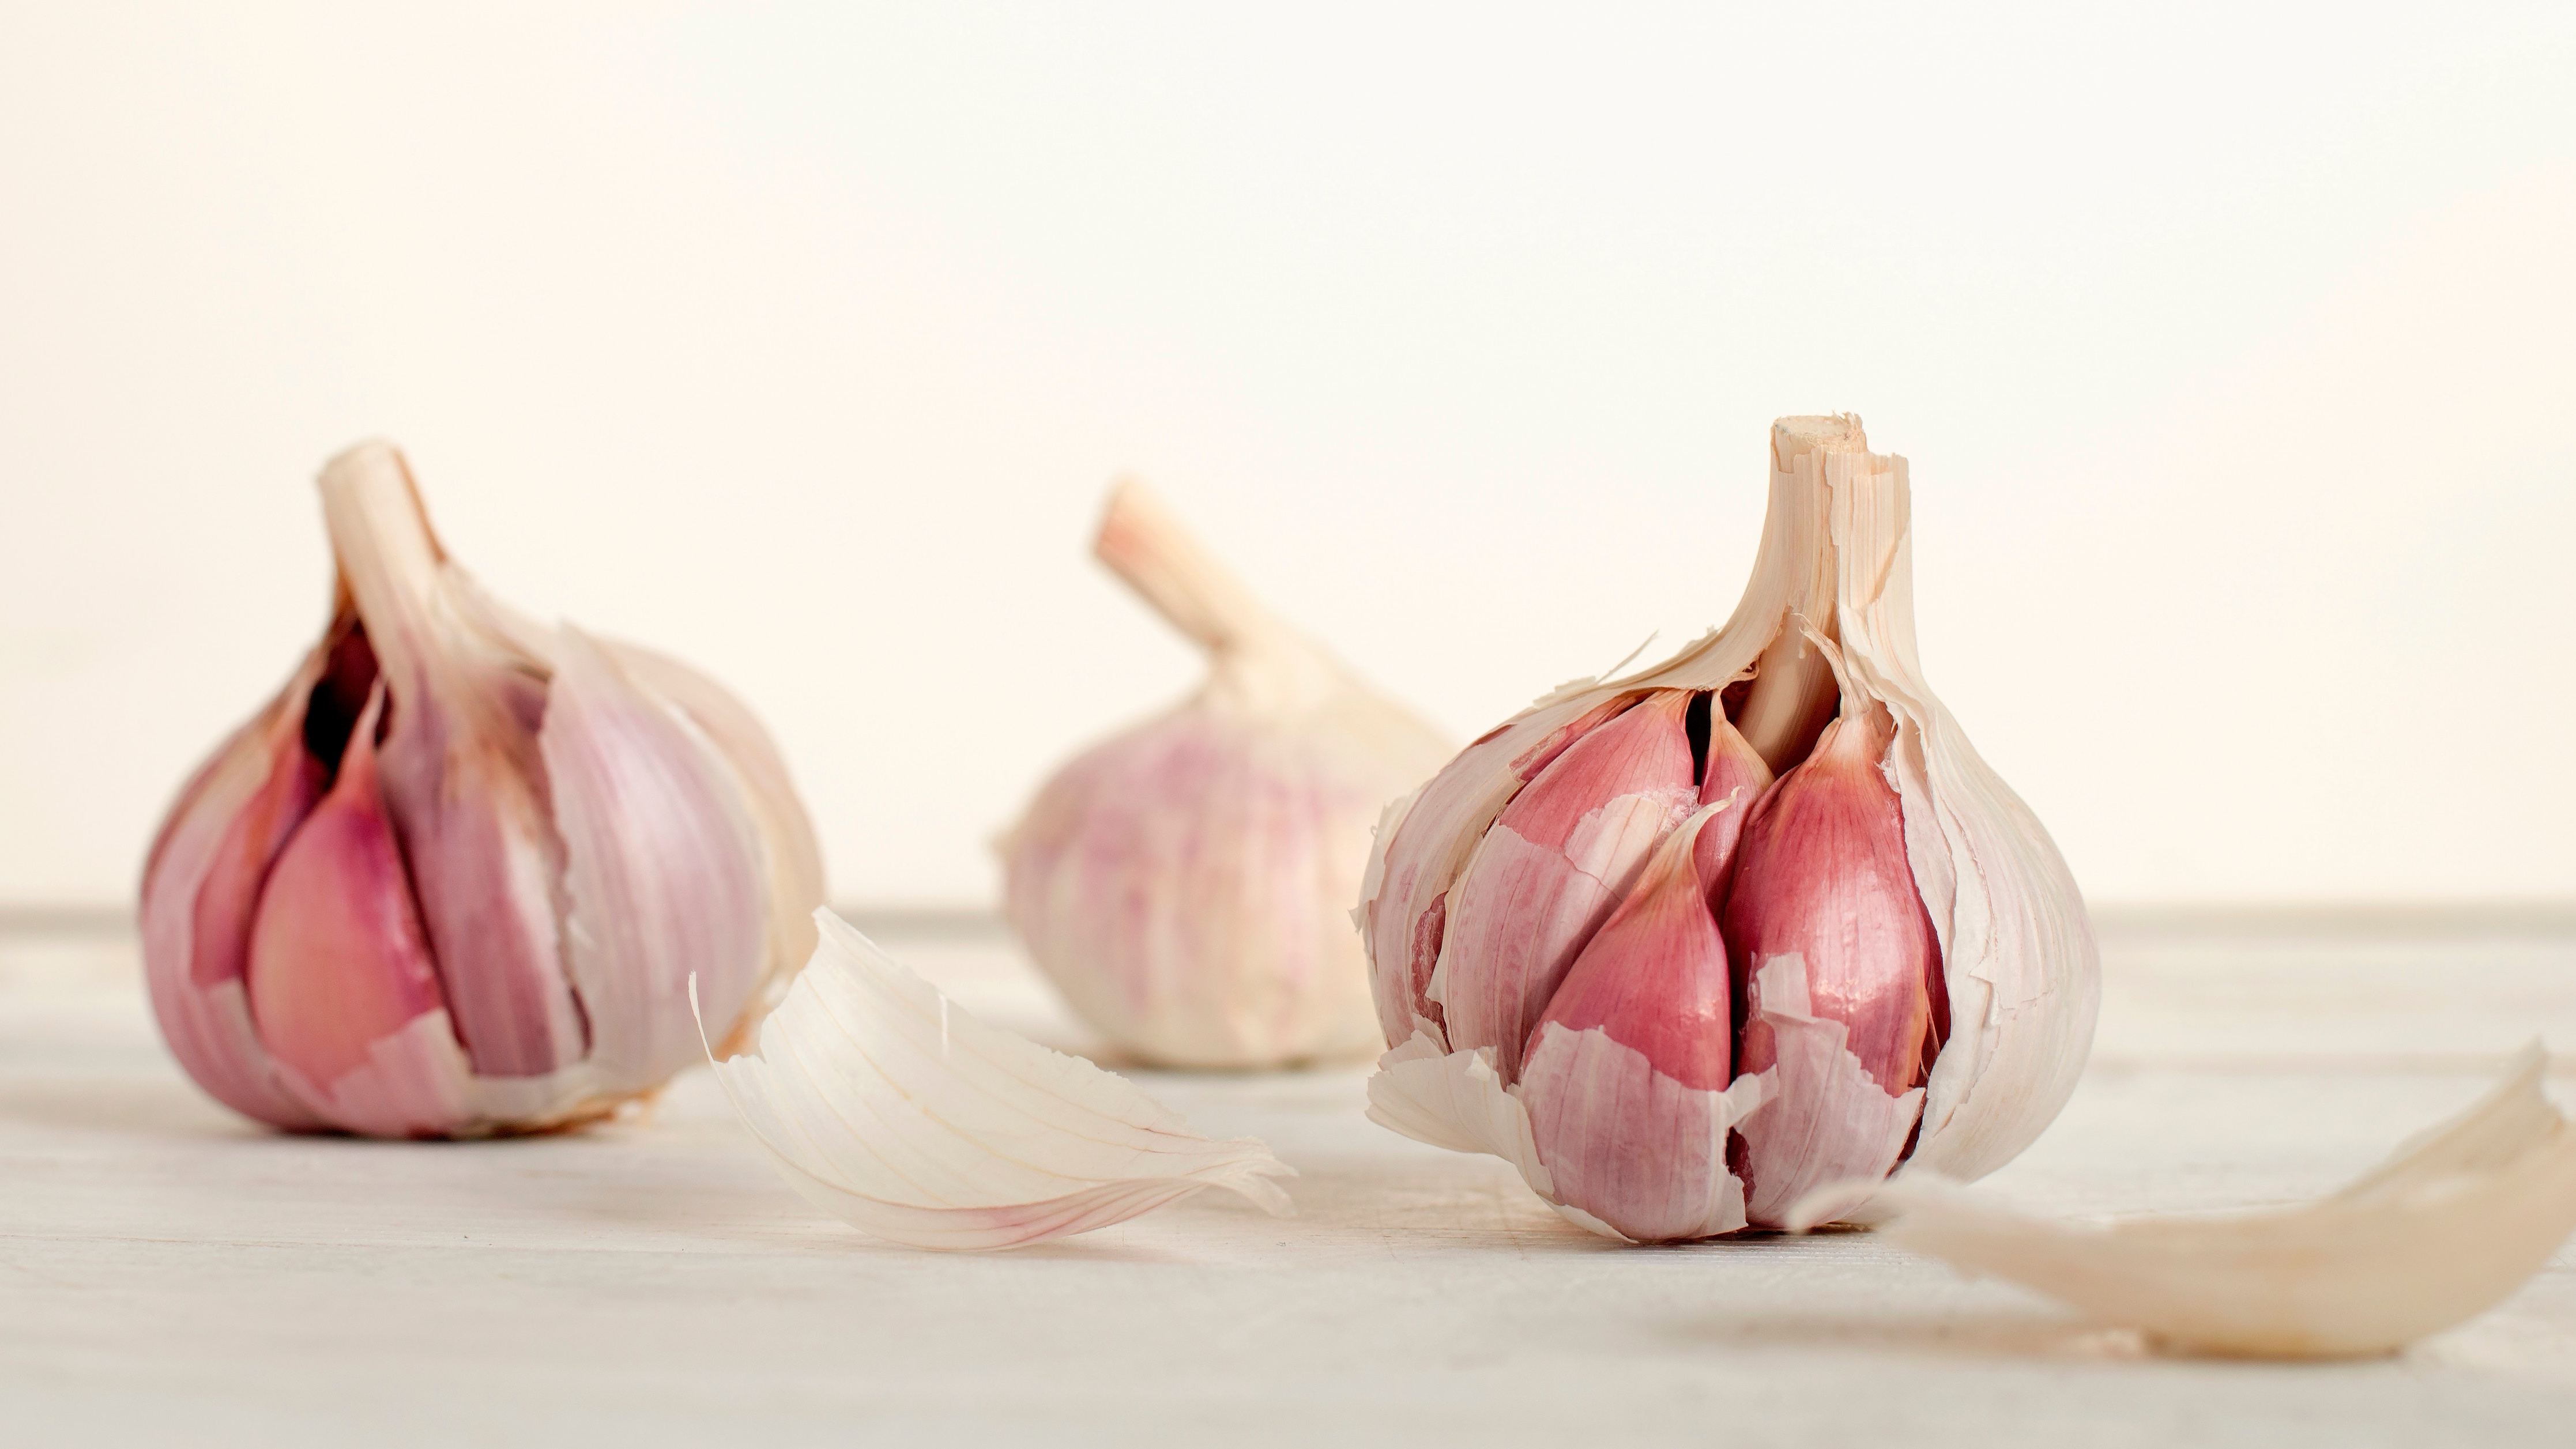 Cook Garlic Before Adding It To Your Sous Vide Bag